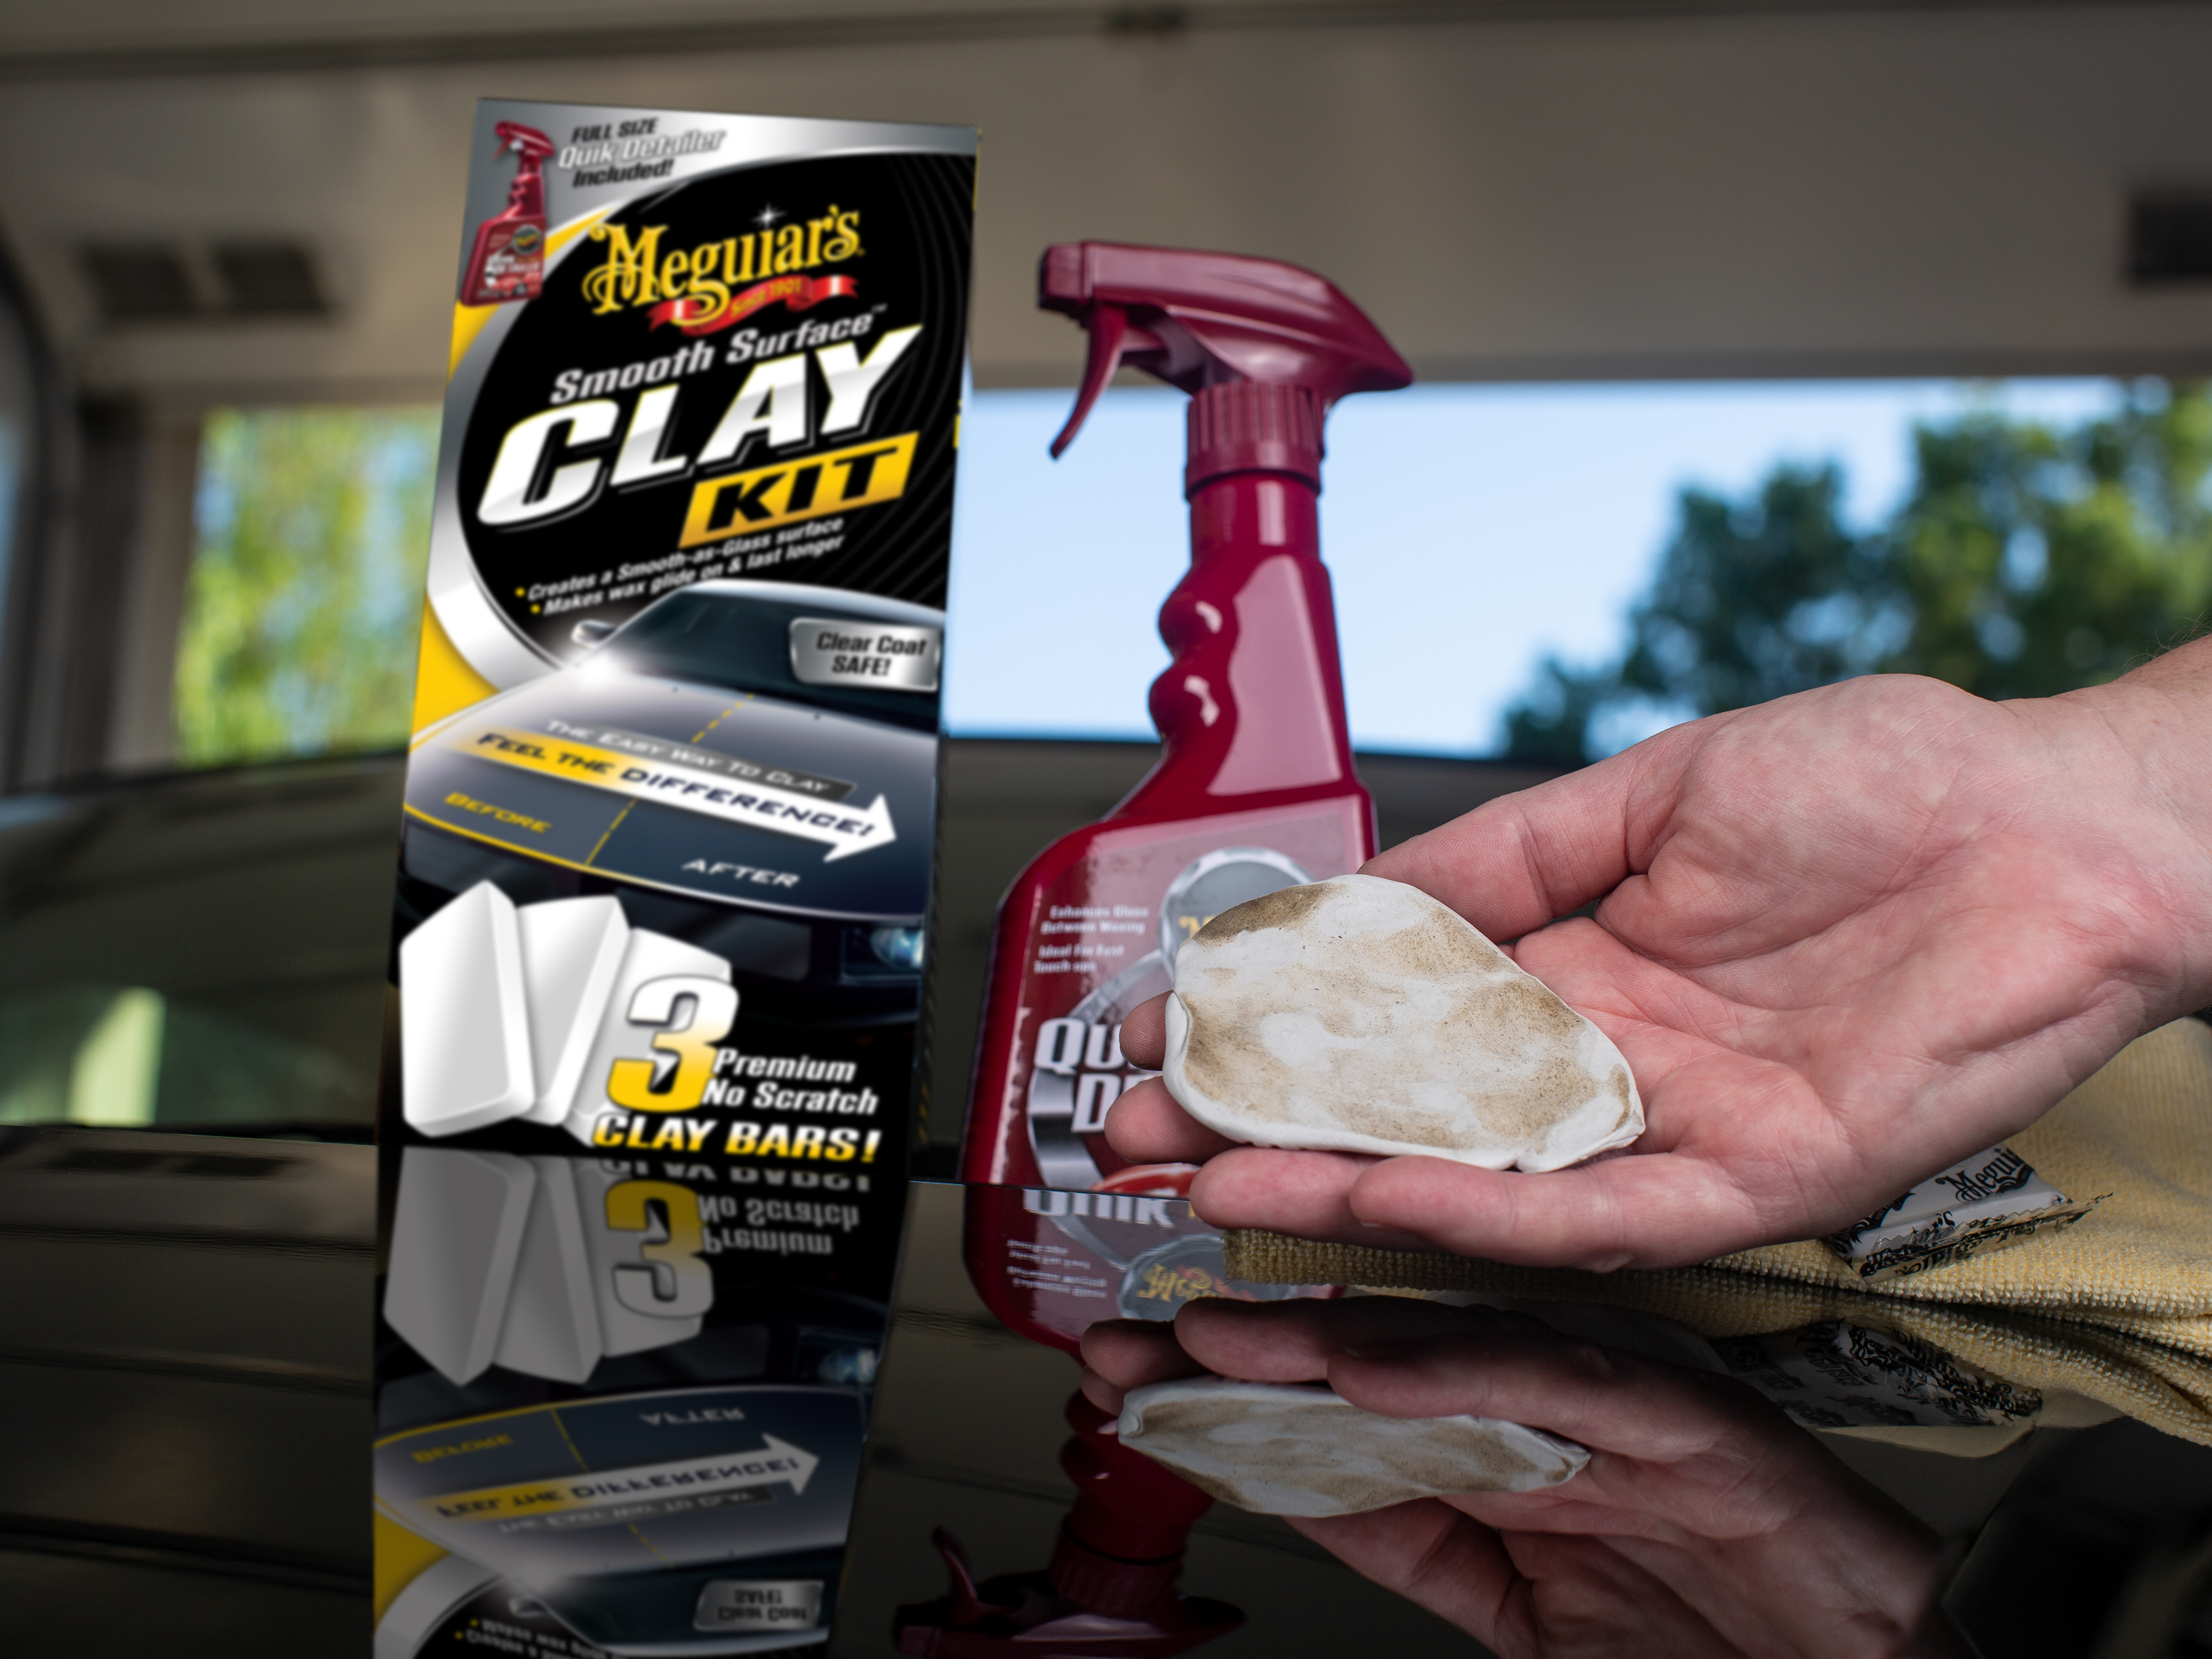 Meguiar's Smooth Surface Clay Kit - Safe and Easy Car Claying for a smooth as Glass Finish, G191700 - image 4 of 16